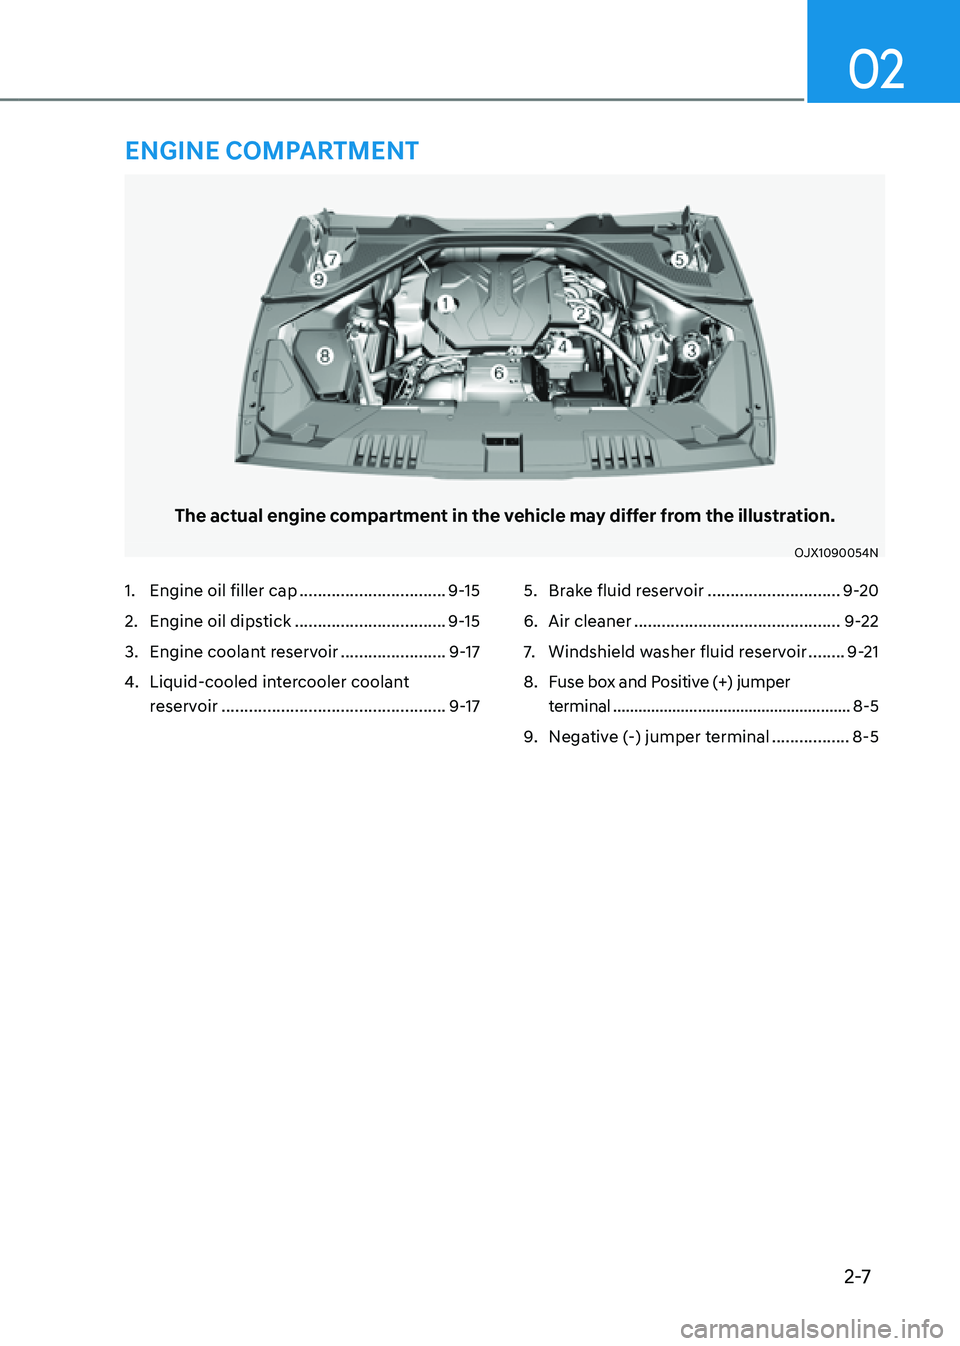 GENESIS GV80 2021  Owners Manual 2-7
02
The actual engine compartment in the vehicle may differ from the illustration.
OJX1090054NOJX1090054N
1. Engine oil filler cap ................................9-15
2. Engine oil dipstick ......